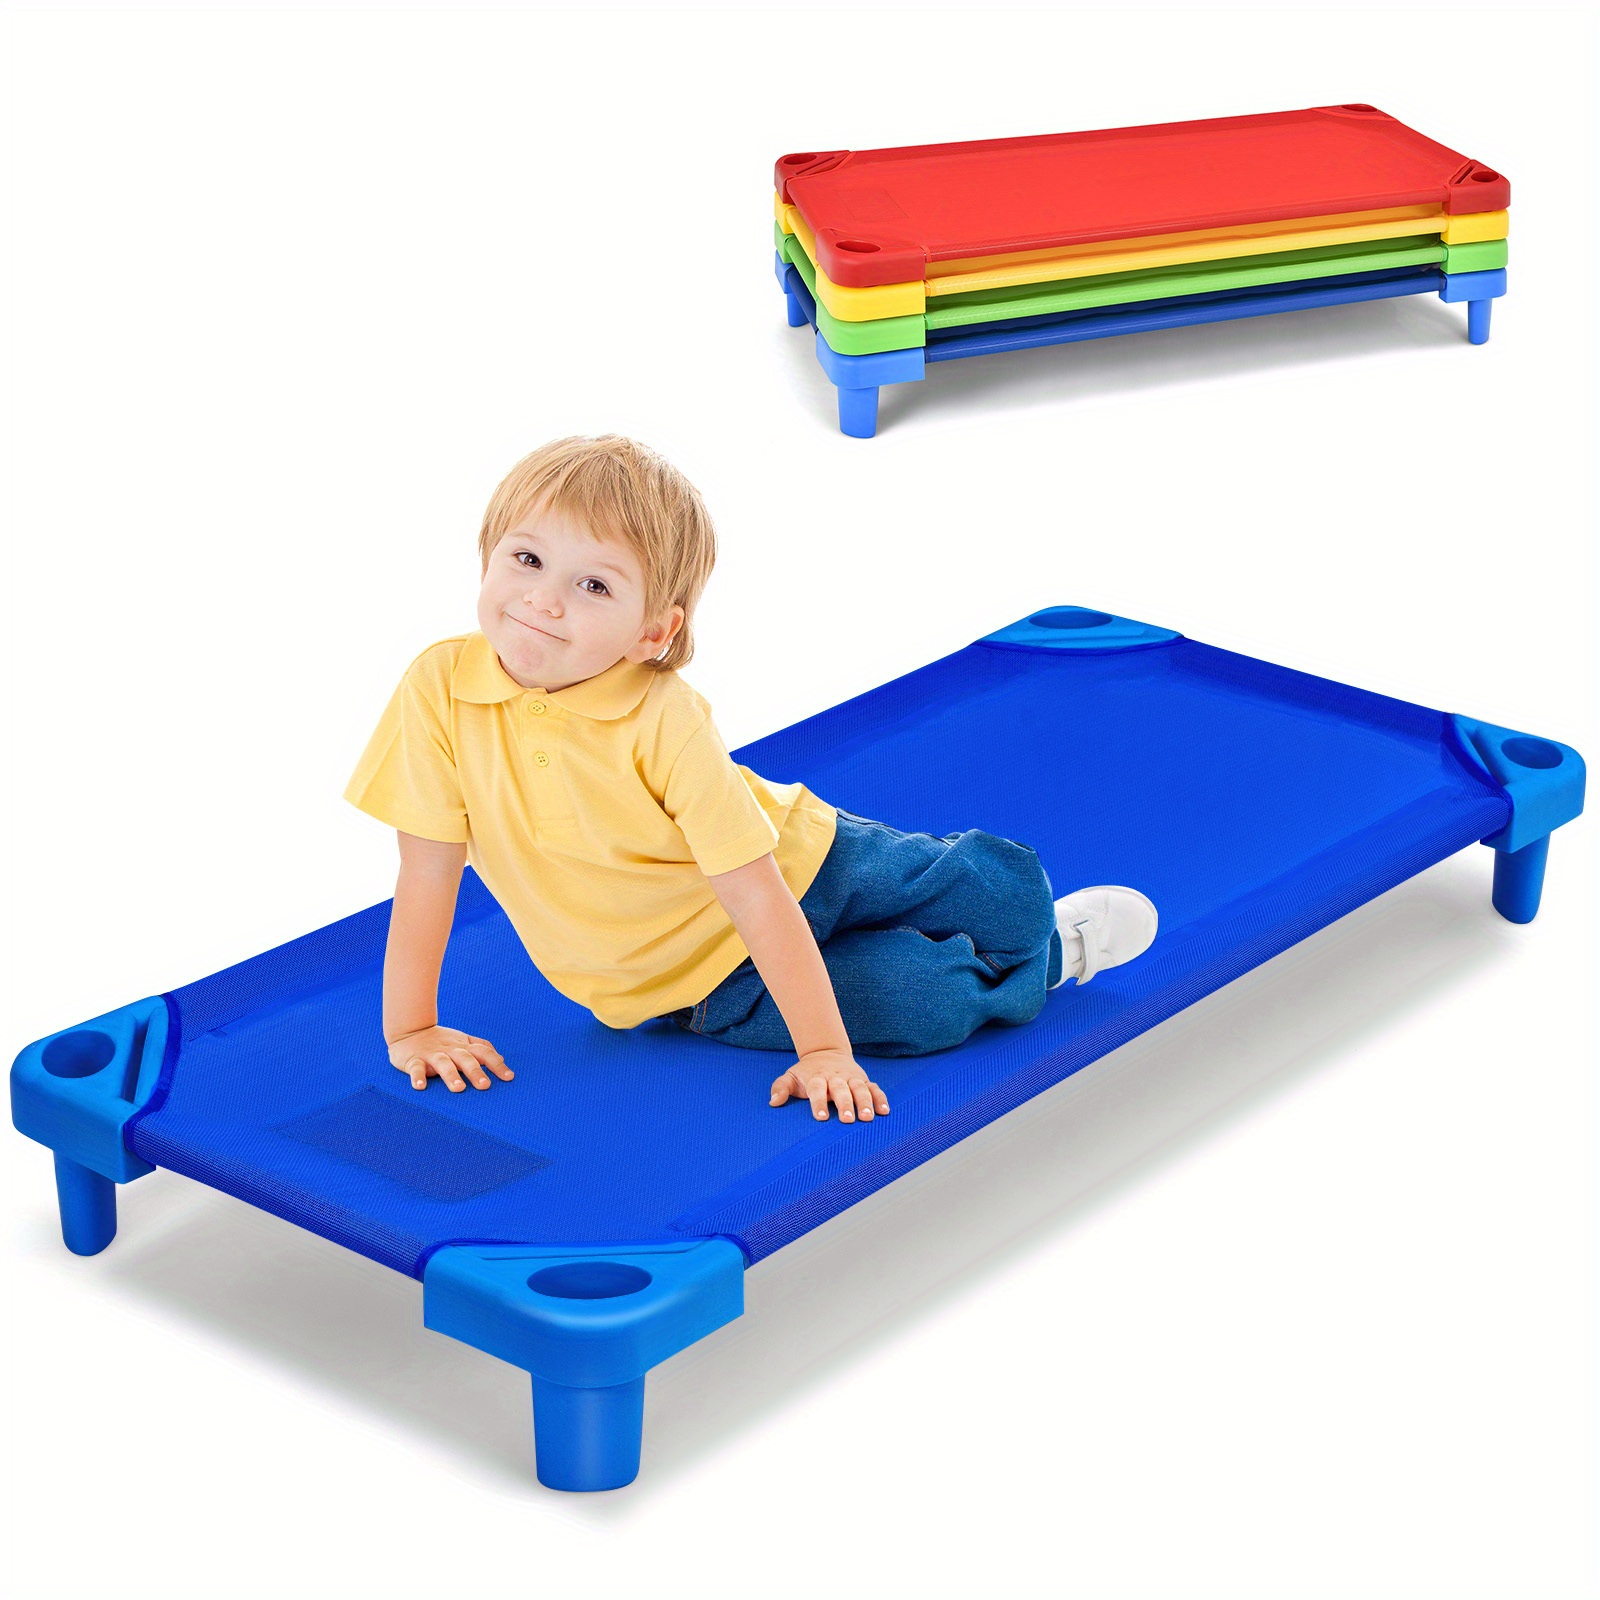 

Lifezeal Pack Of 4 Kids Stackable Cot 51"lx23"w Daycare Rest Mat Colorful